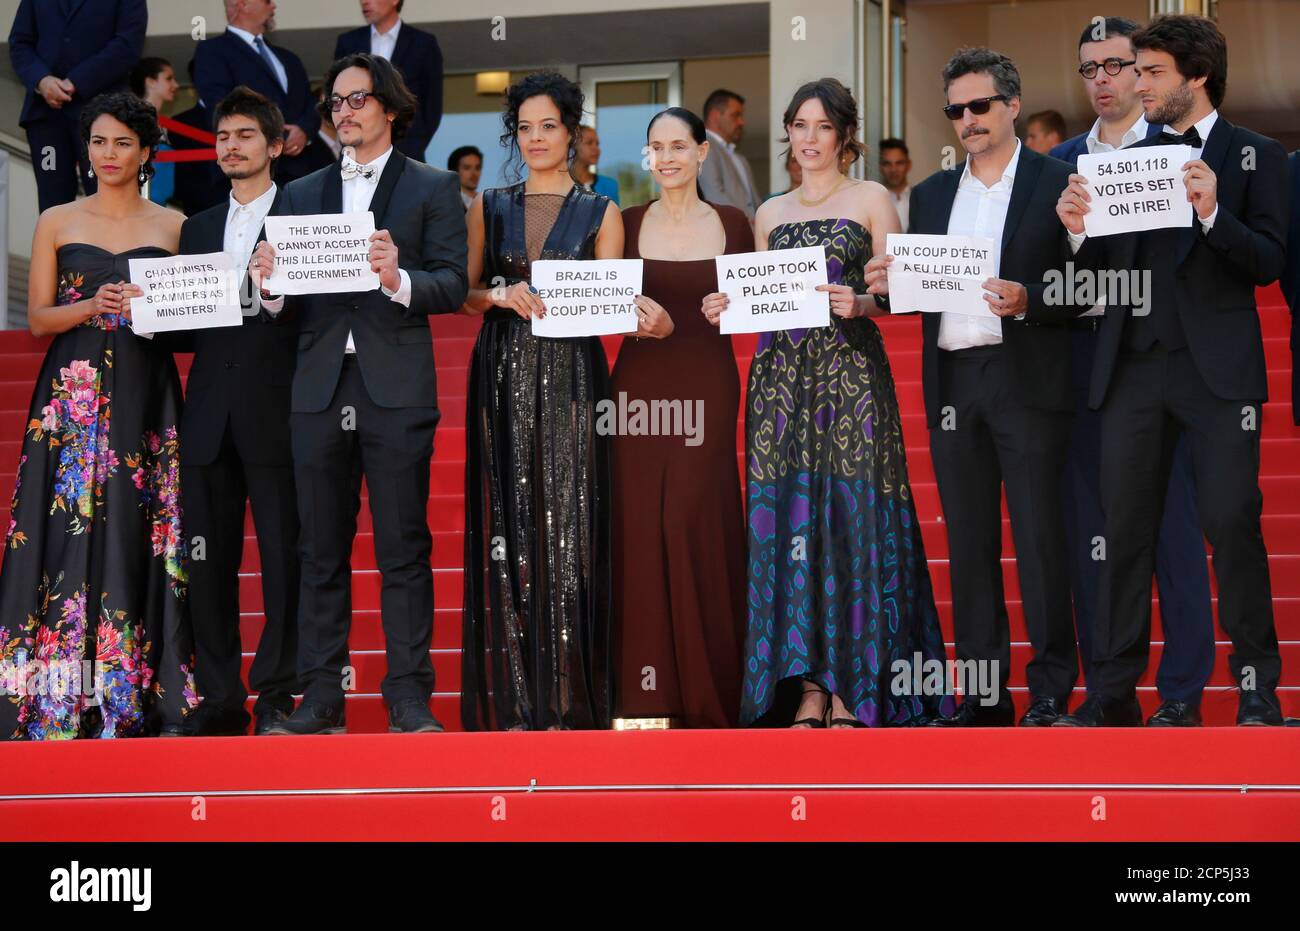 Director Kleber Mendonca Filho 3rdr And Cast Members Maeve Jinkings 4thl Sonia Braga C Barbara Colen L Producer Emilie Lesclaux 4thr And Team Hold Placards To Protest Against The Impeachment Of Suspended